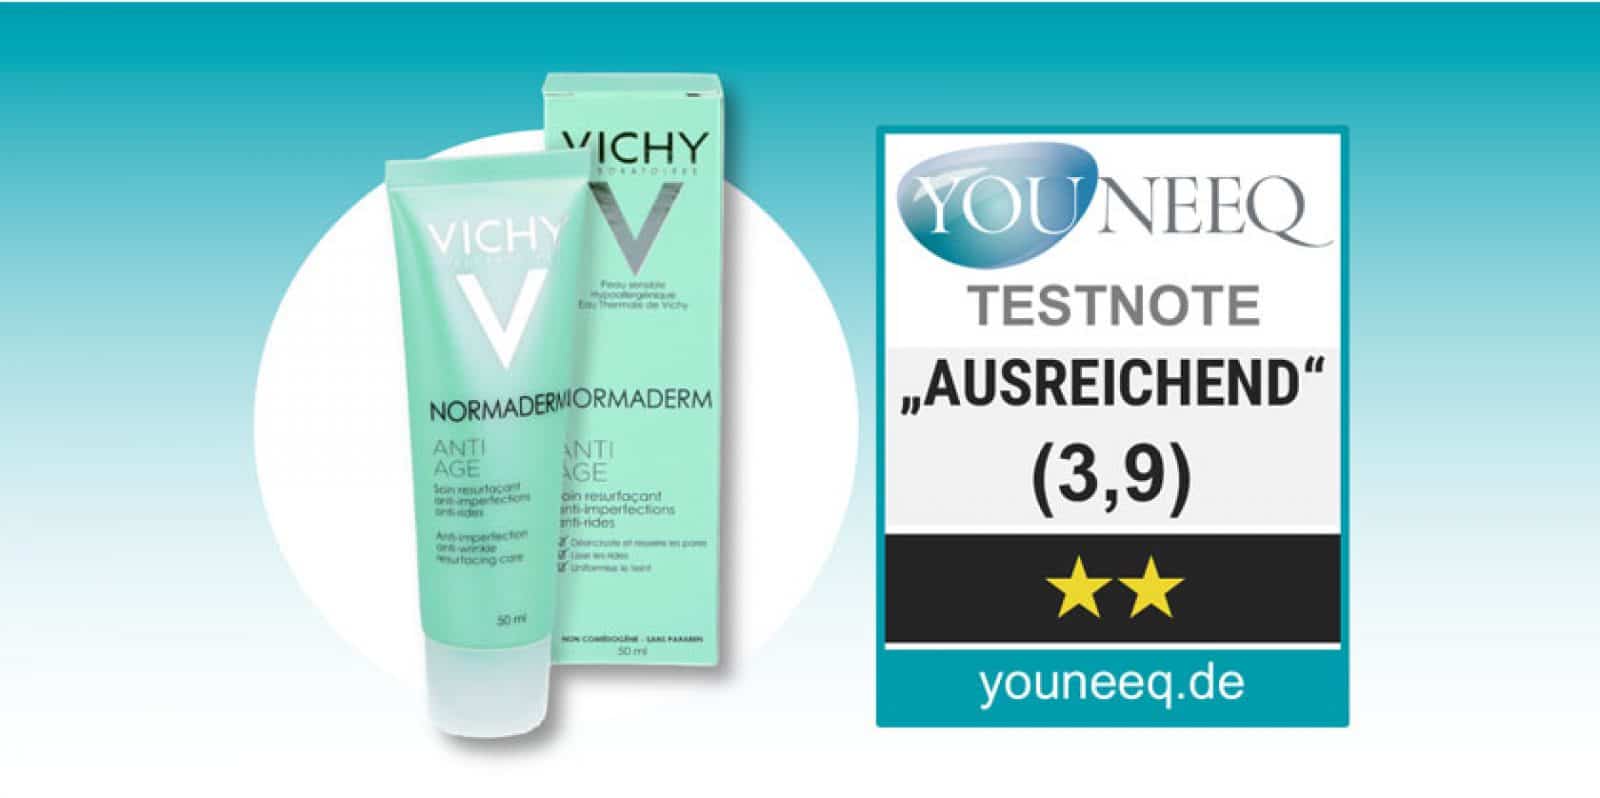 Vichy Normaderm Anti-Age Test